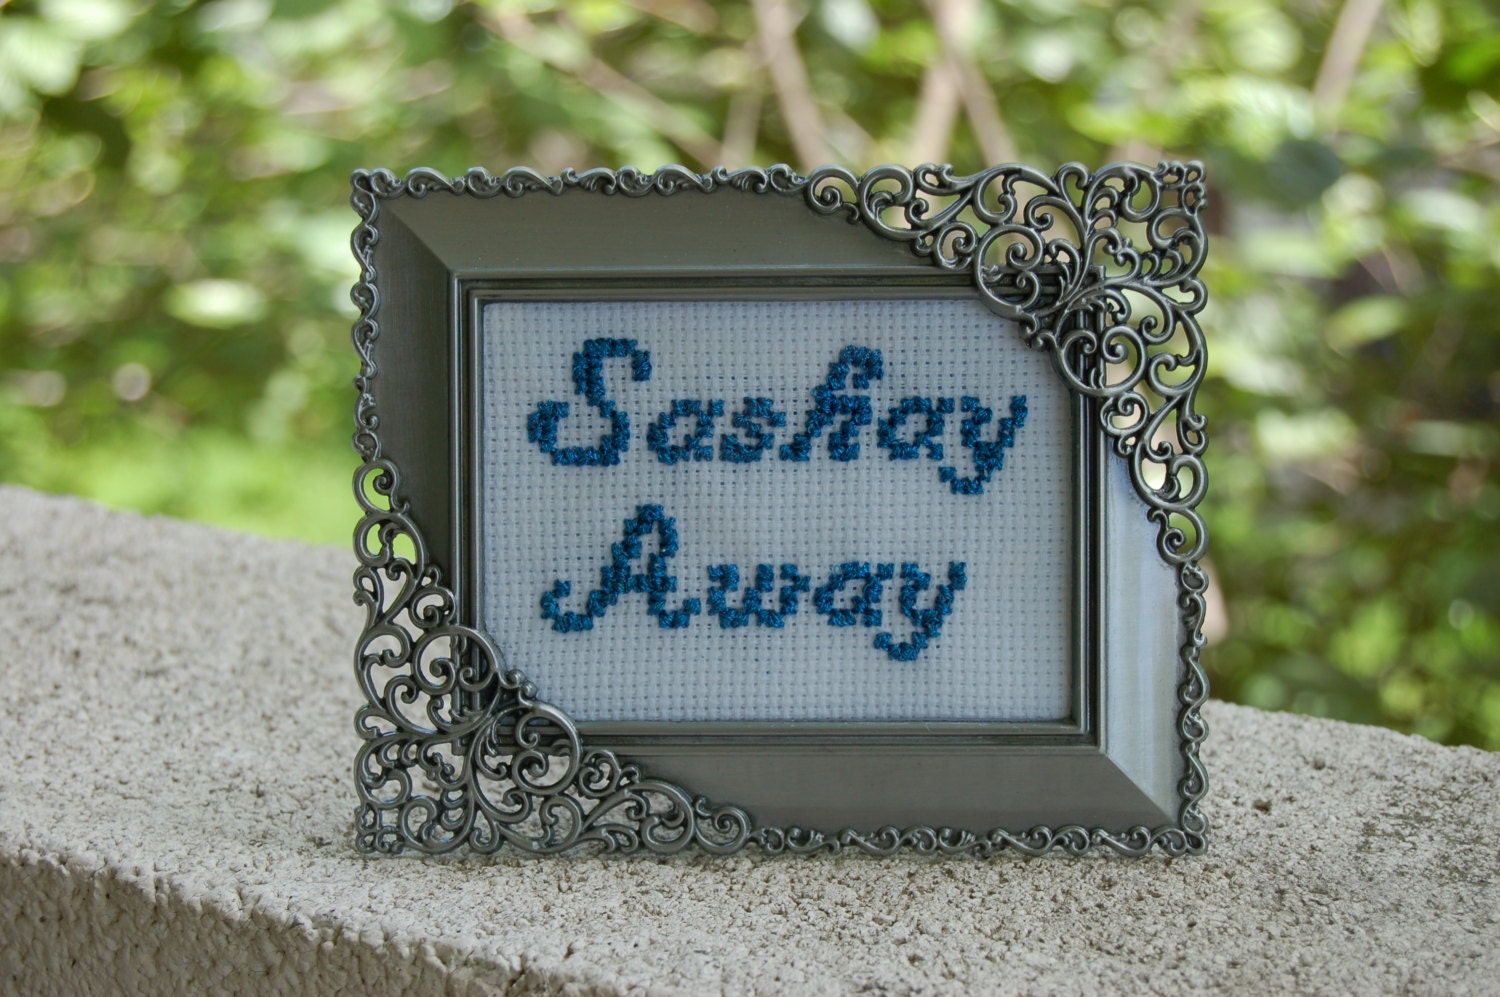 Sashay Away RuPaul's Drag Race Quote Cross Stitch Framed